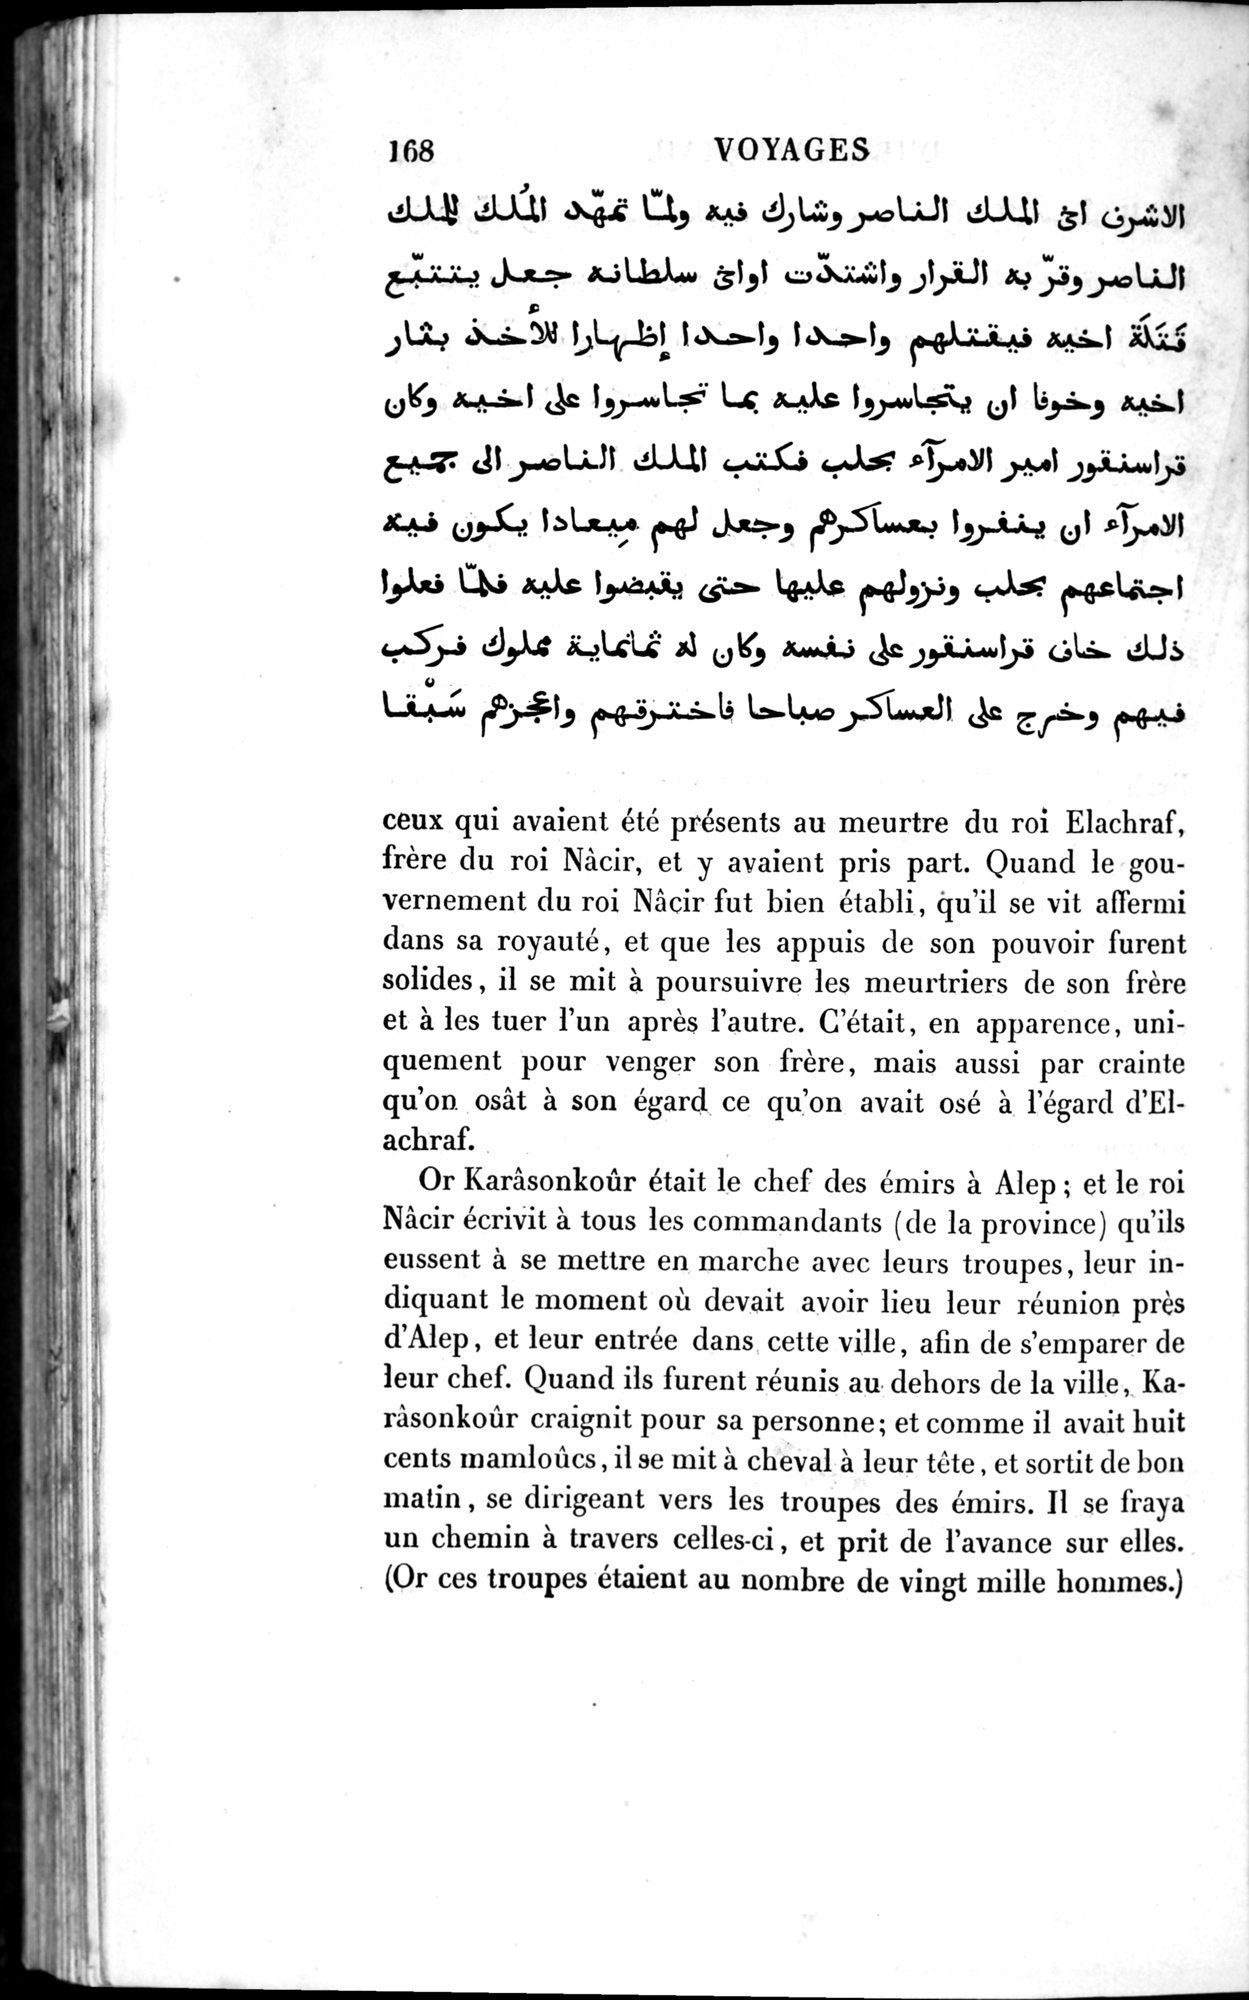 Voyages d'Ibn Batoutah : vol.1 / Page 228 (Grayscale High Resolution Image)